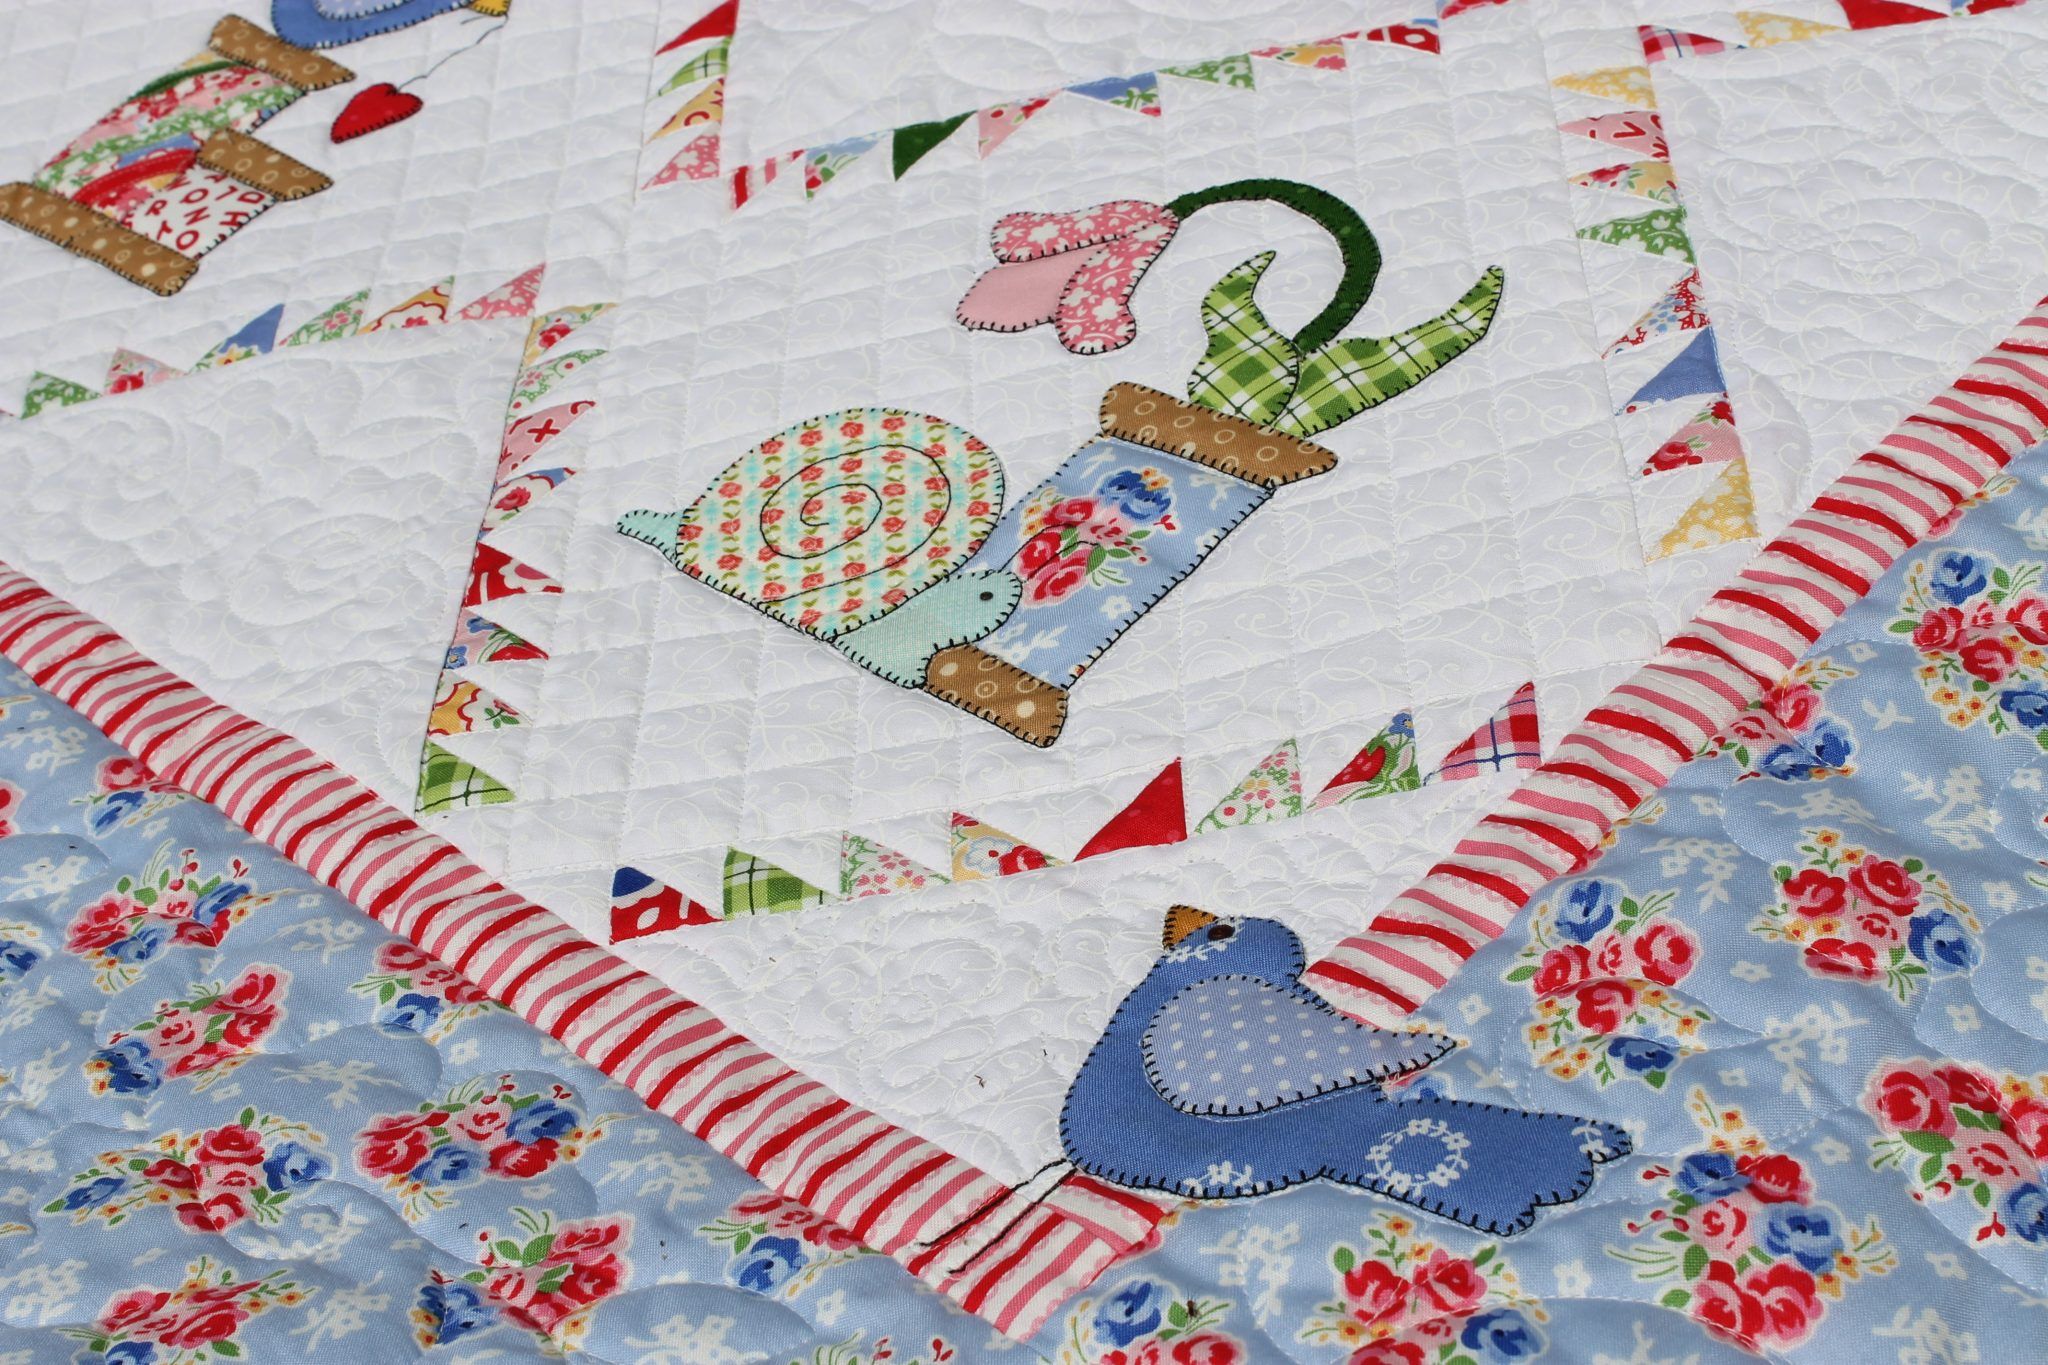 Quilting patterns